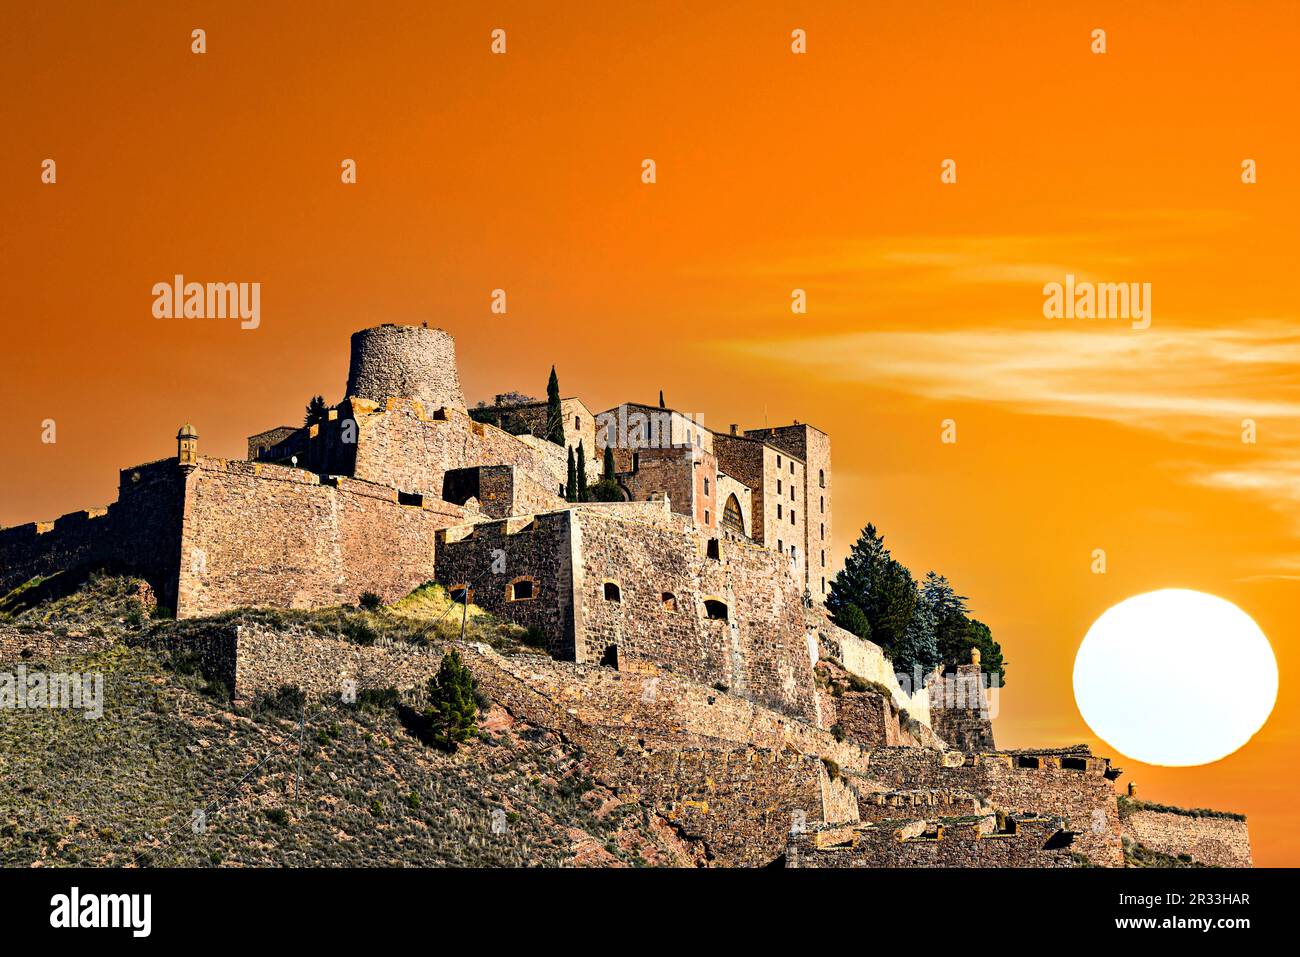 Sunset at the famous medieval castle in the city of Cardona, Barcelona, Catalonia, Spain Stock Photo